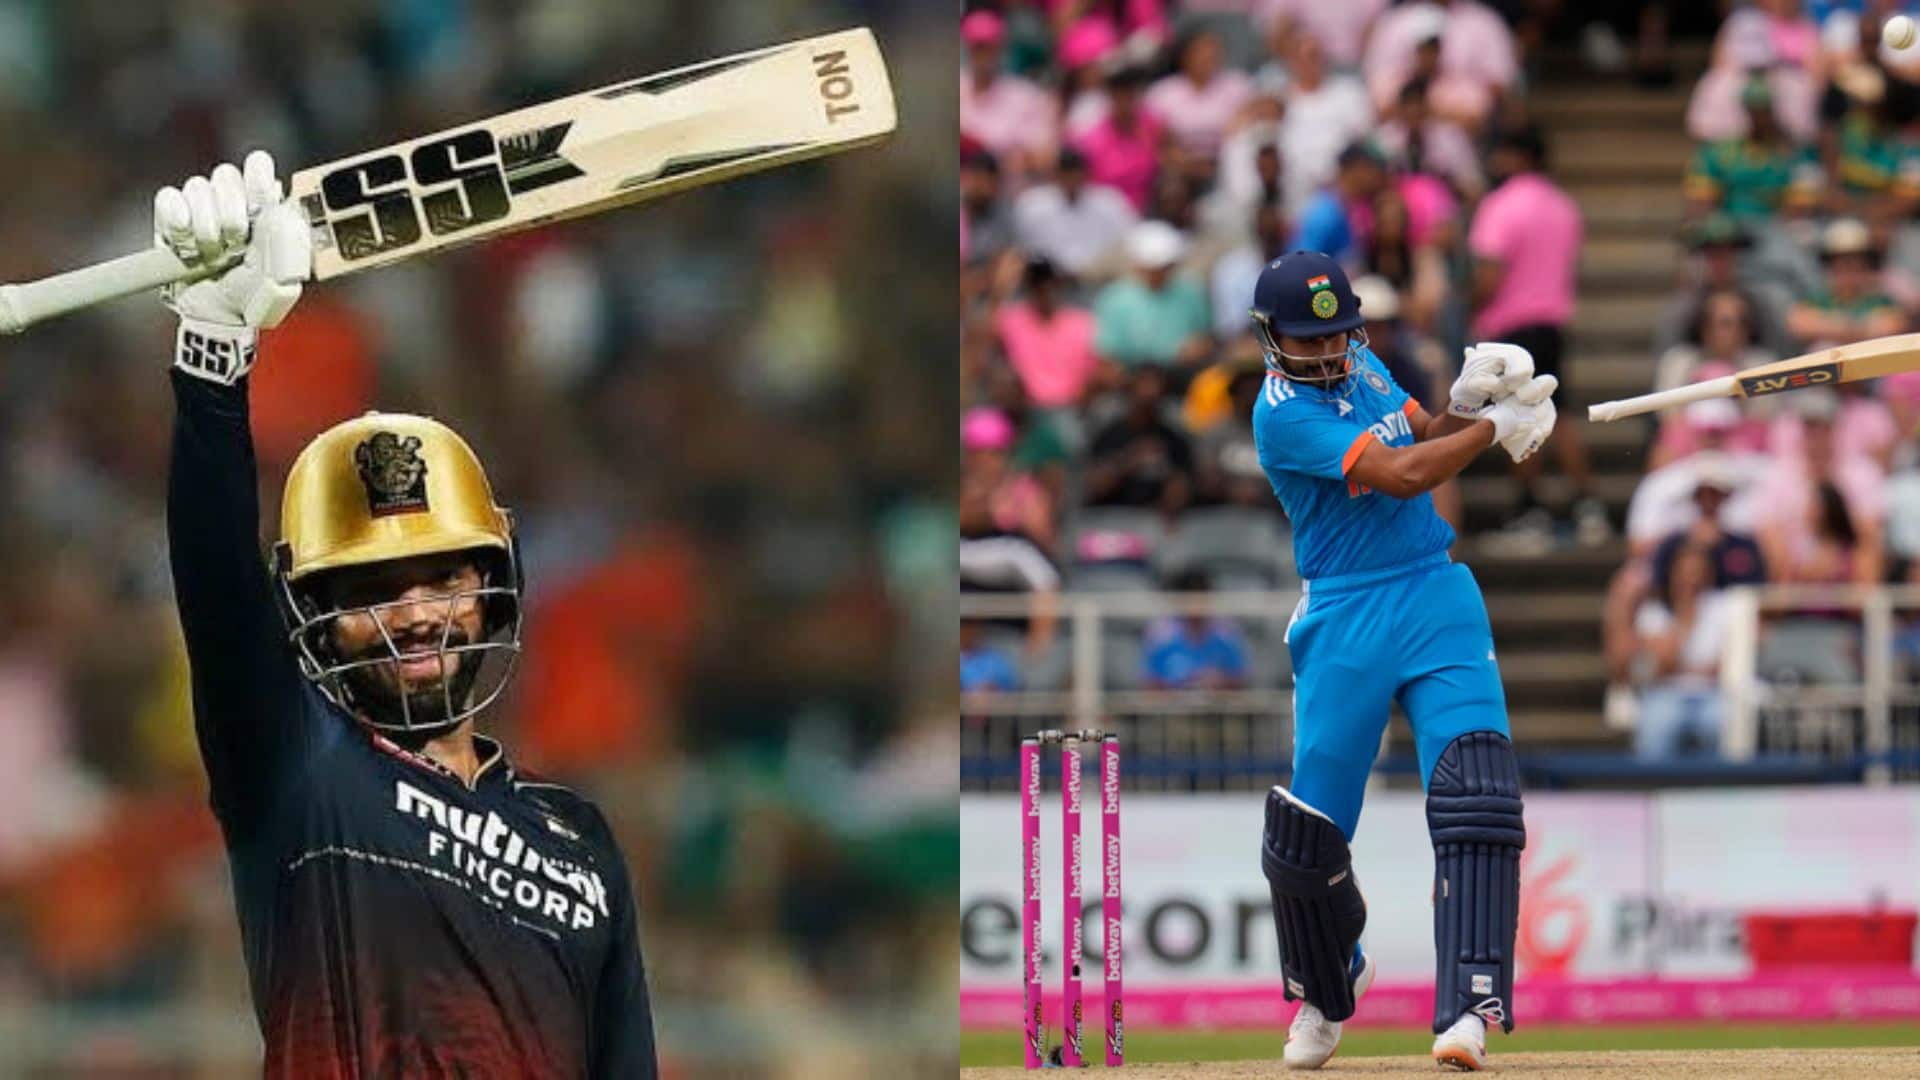 RCB's Rajat Patidar In, Shreyas Iyer Out; Here's India's Playing XI For 2nd ODI Vs South Africa